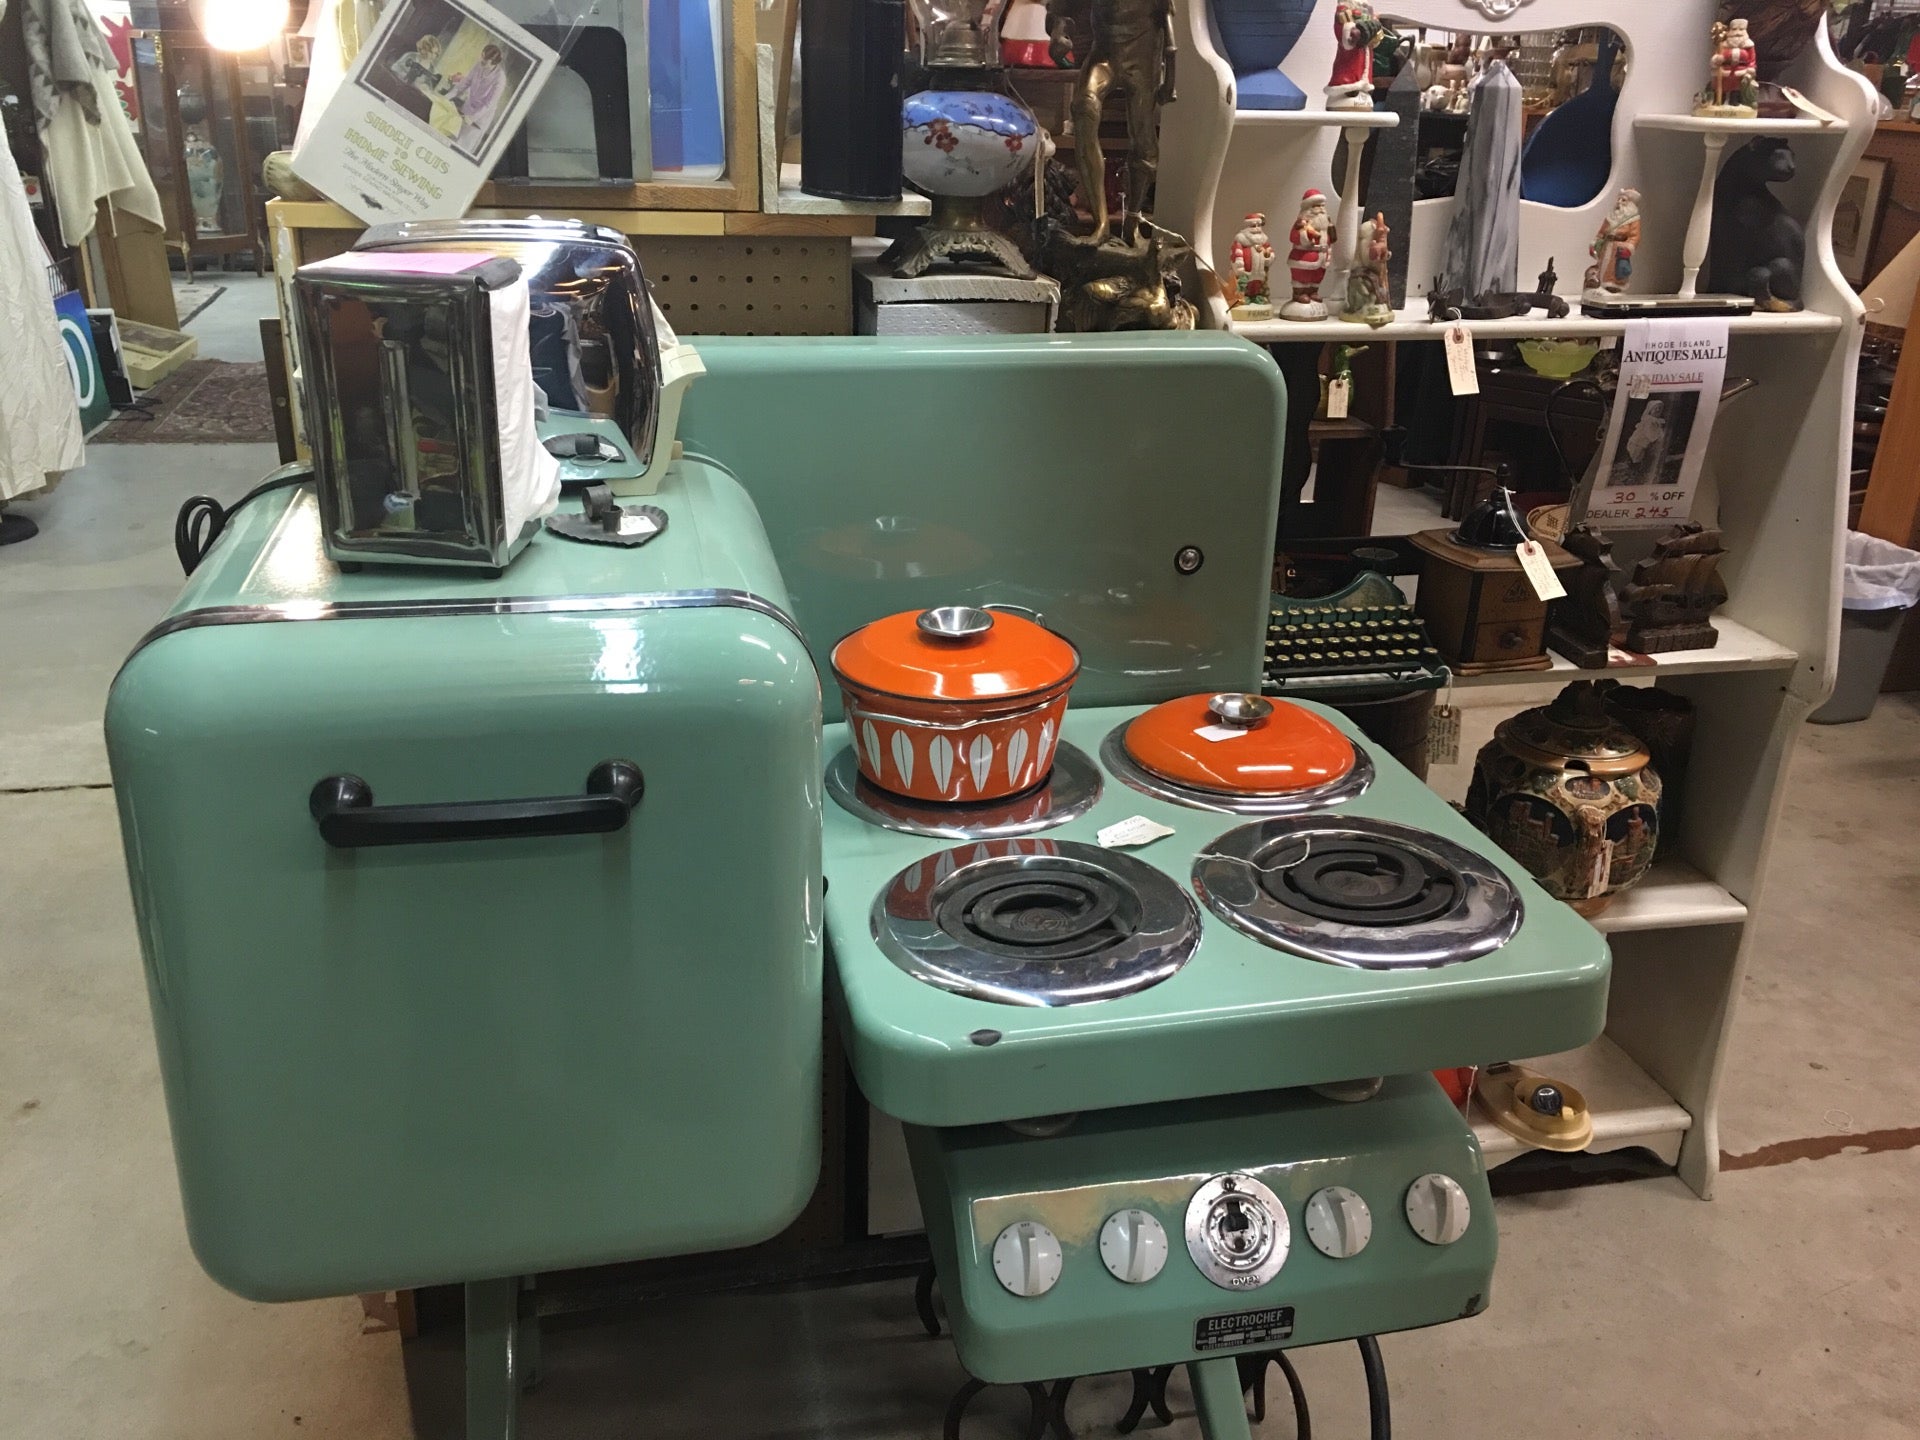 Electrochef: All-in-One Vintage Kitchen Appliance Set